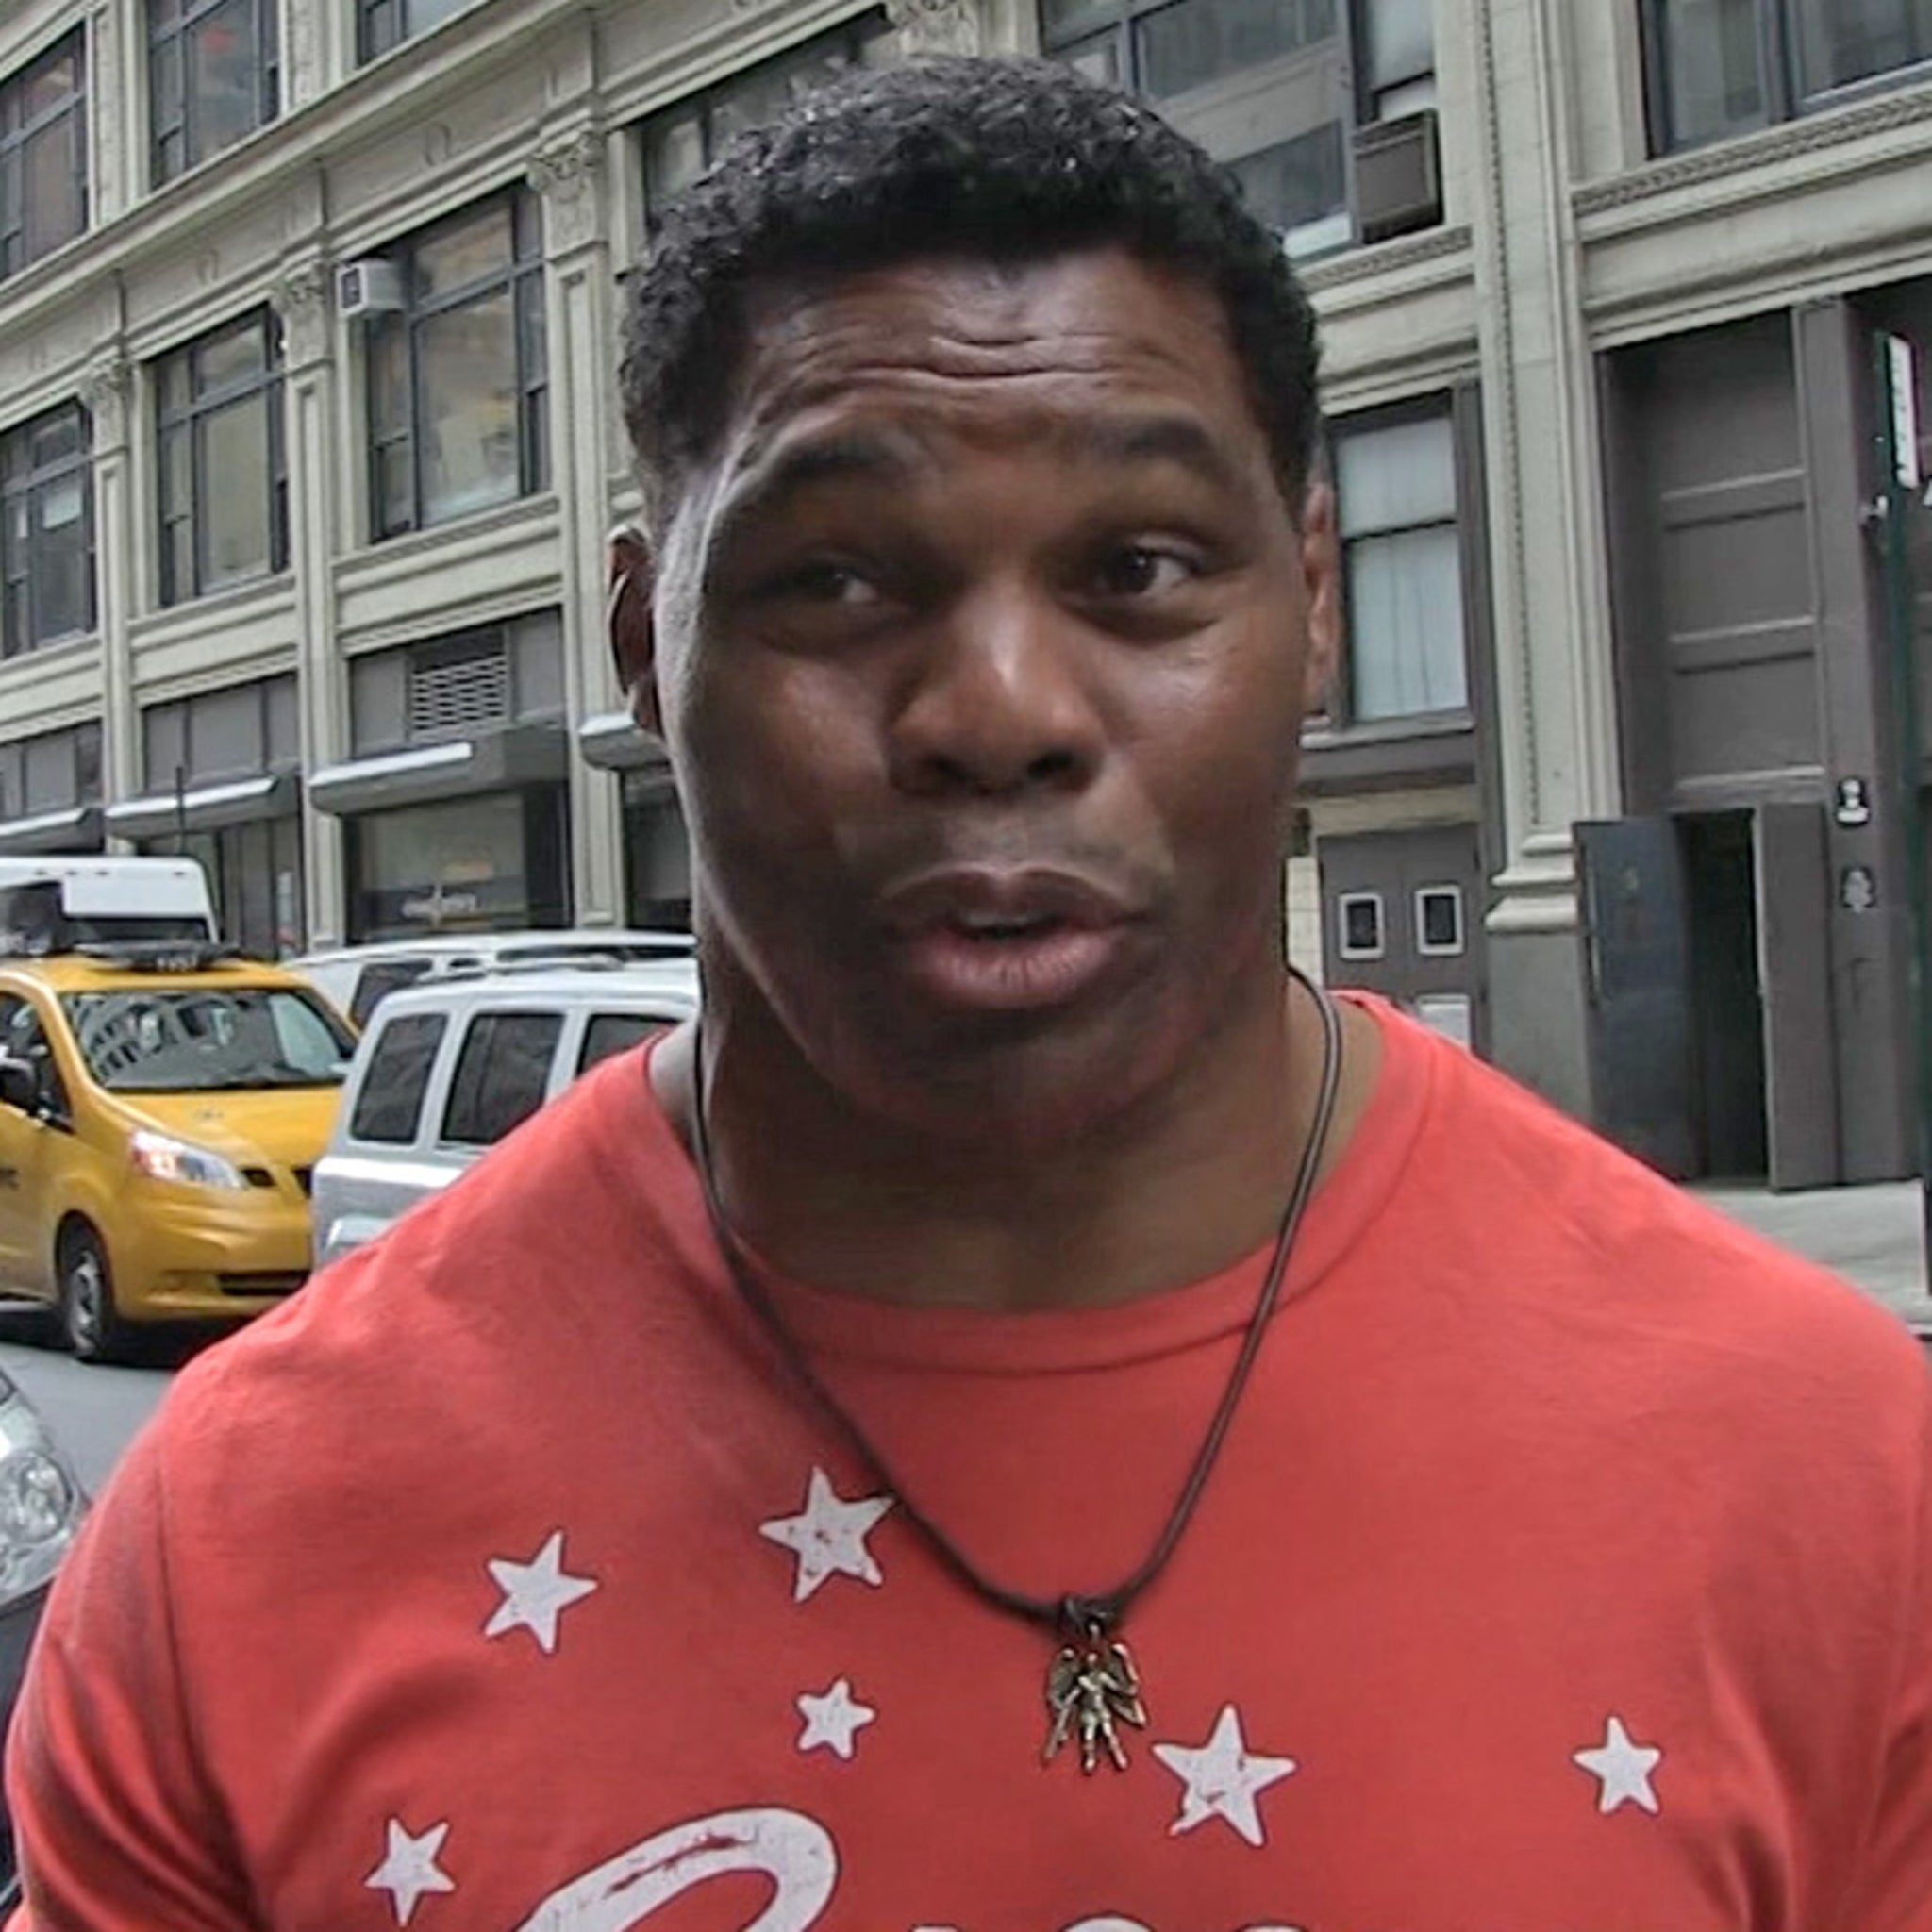 Herschel Walker answers claims, 'This abortion thing, it's false' |  11alive.com